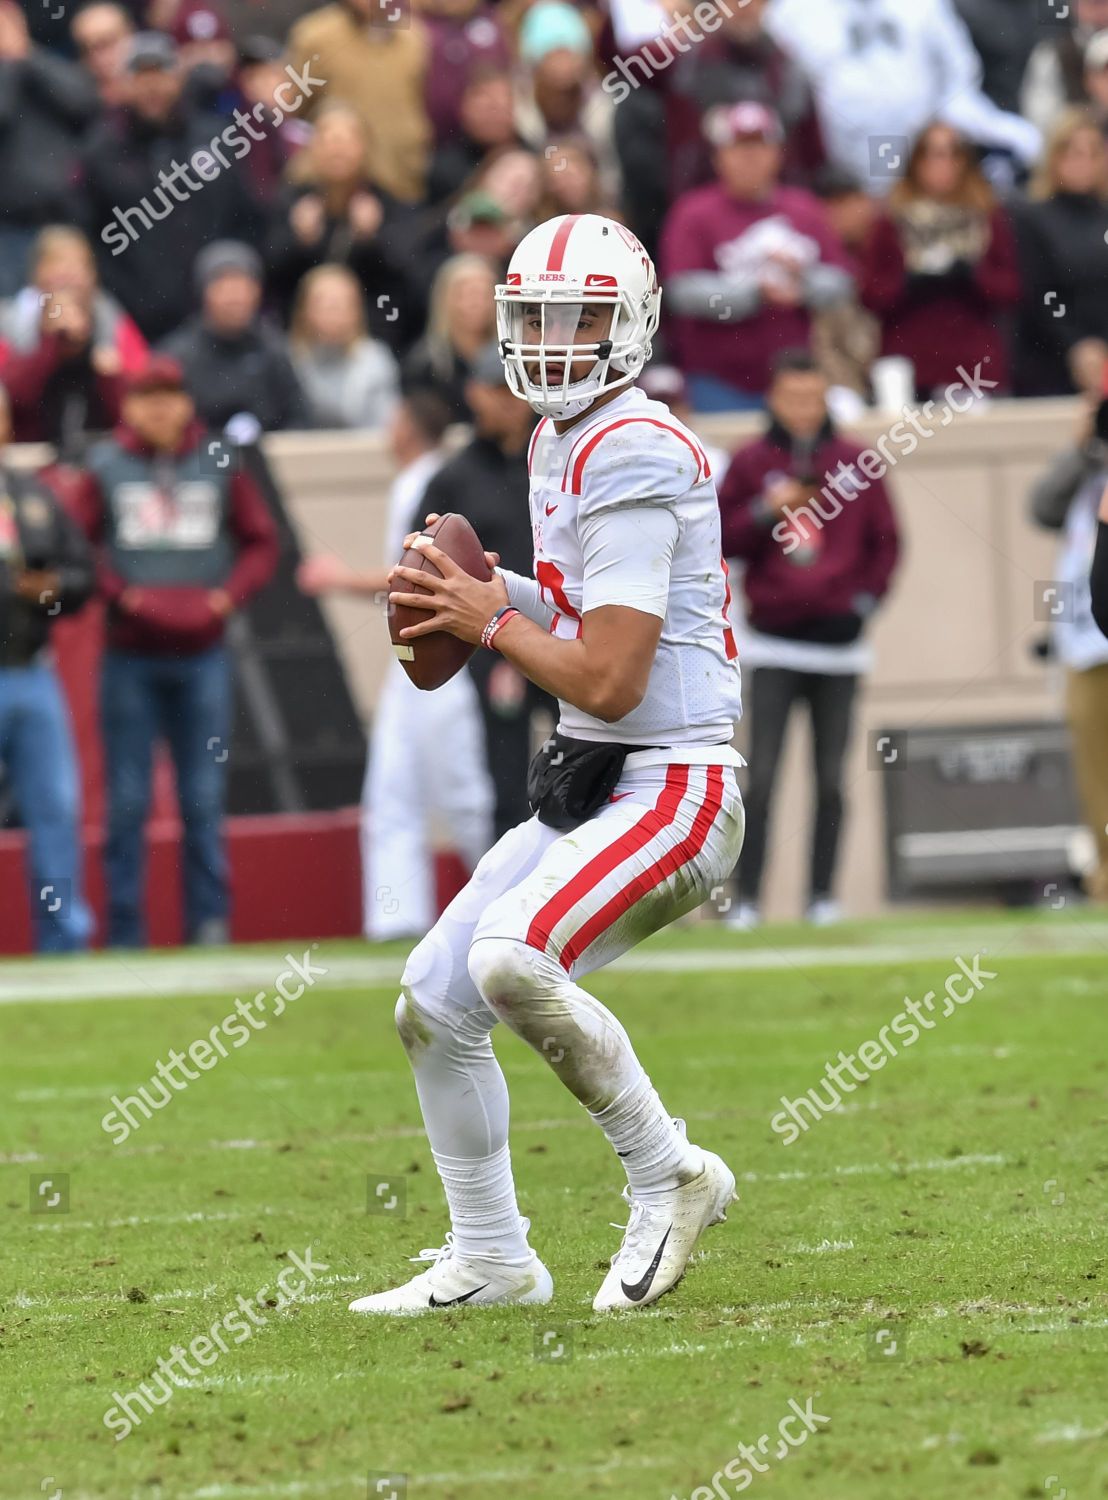 November 10, 2018 College Station, TXOle Miss quarterback, Jordan Ta'amu  (10), making a play during the NCAA football game between the Texas A&M  Aggies and the Ole Miss Rebels, in College Station, TX. (Absolute Complete  Photographer